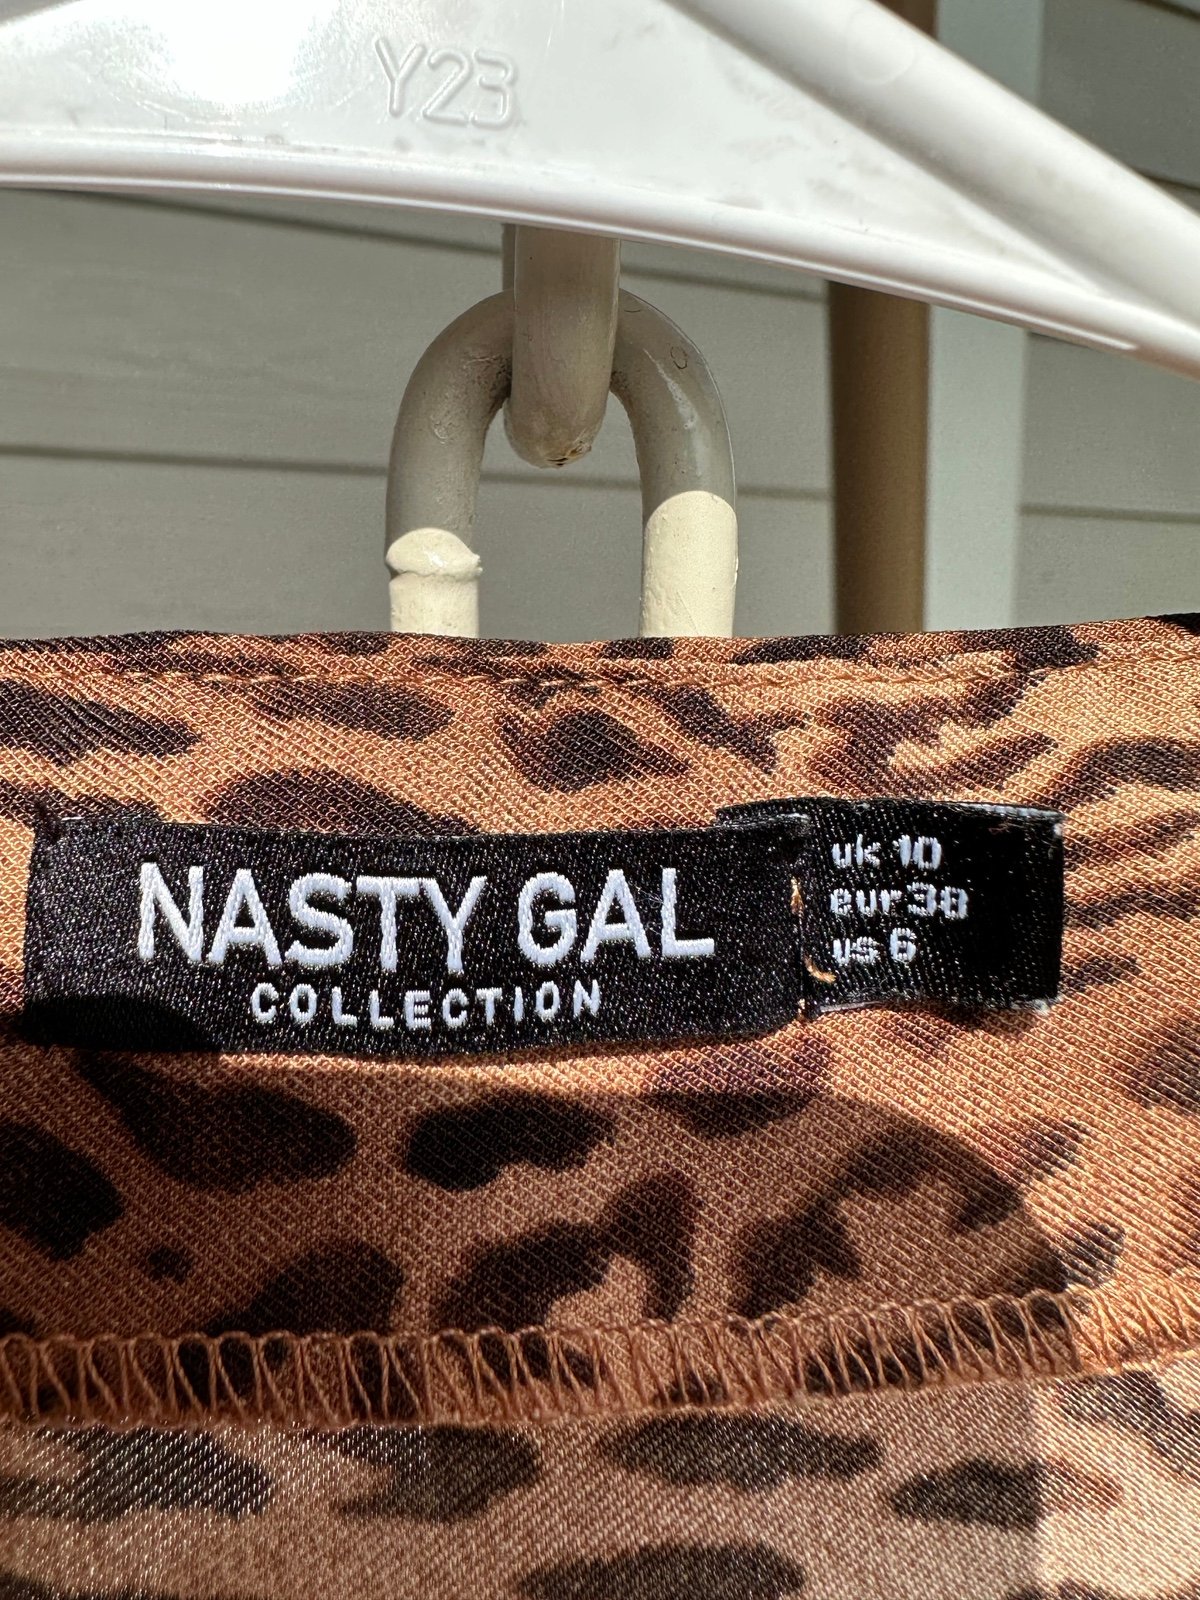 Cheap Nasty gal crop top iUgHWTSlP outlet online shop